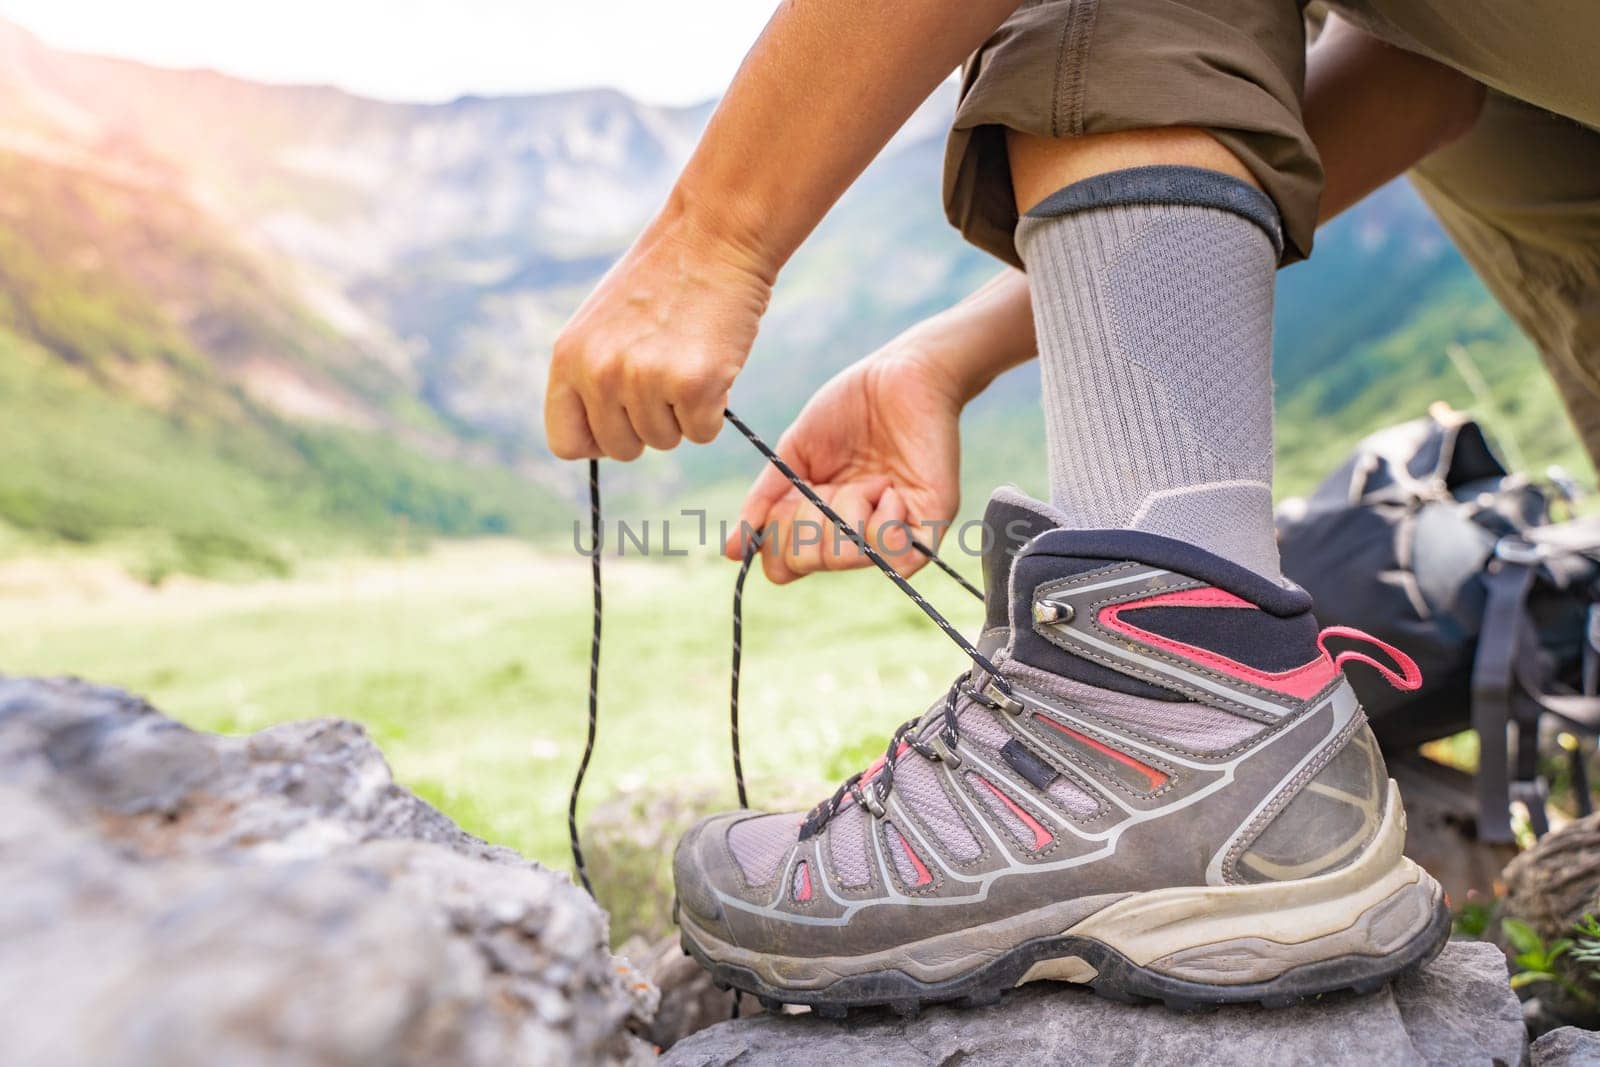 Woman tying hiking boot outdoors on trail in summer. by PaulCarr